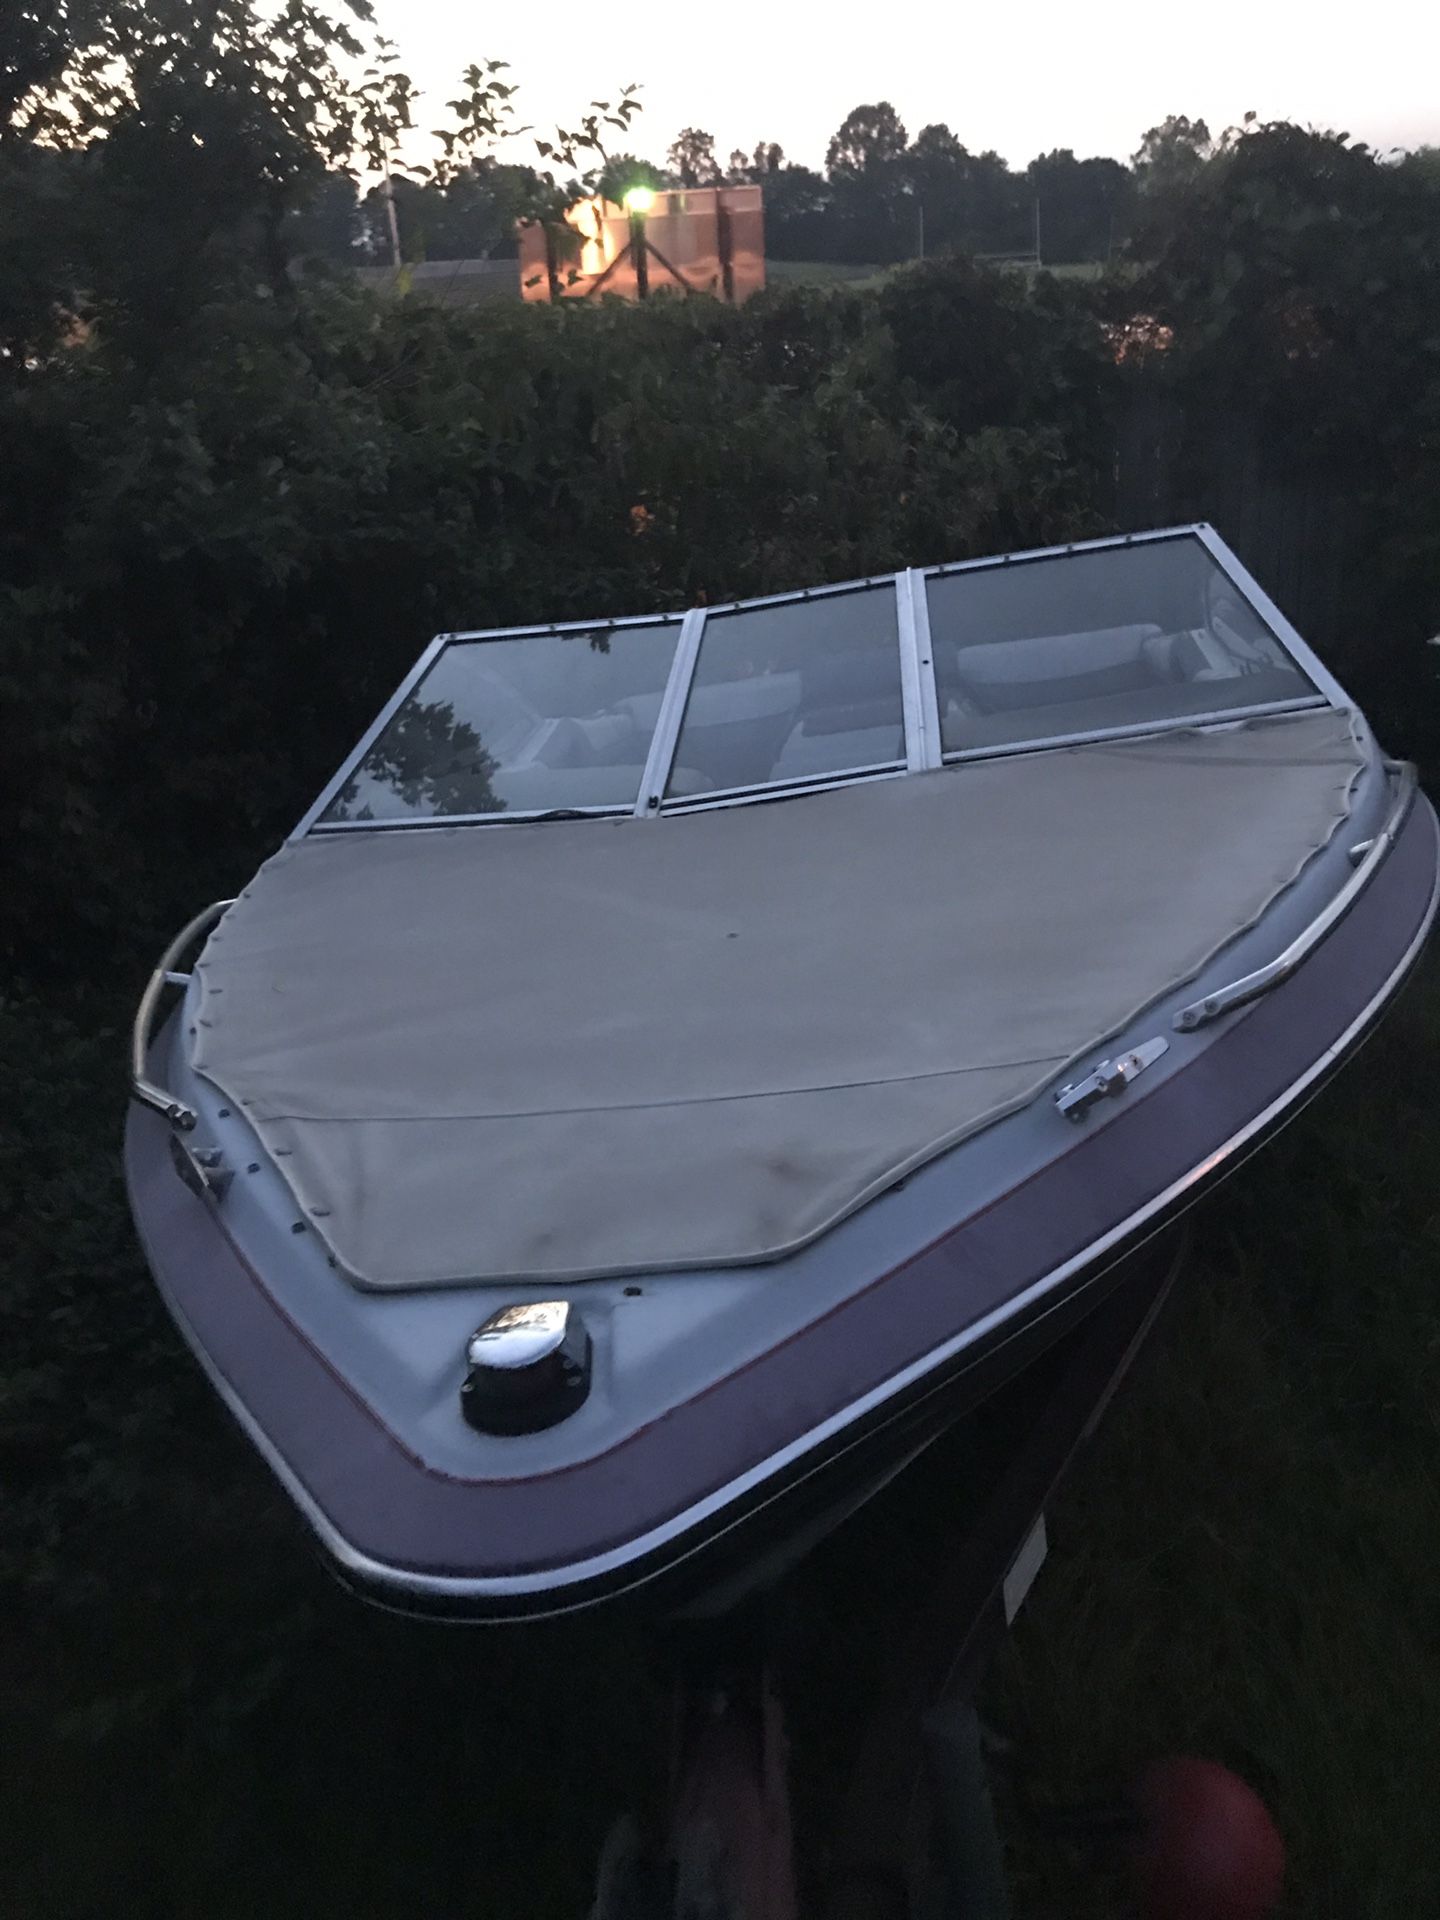 Maxun! Mercruiser motor Does it run I have 2 title boat and trailer